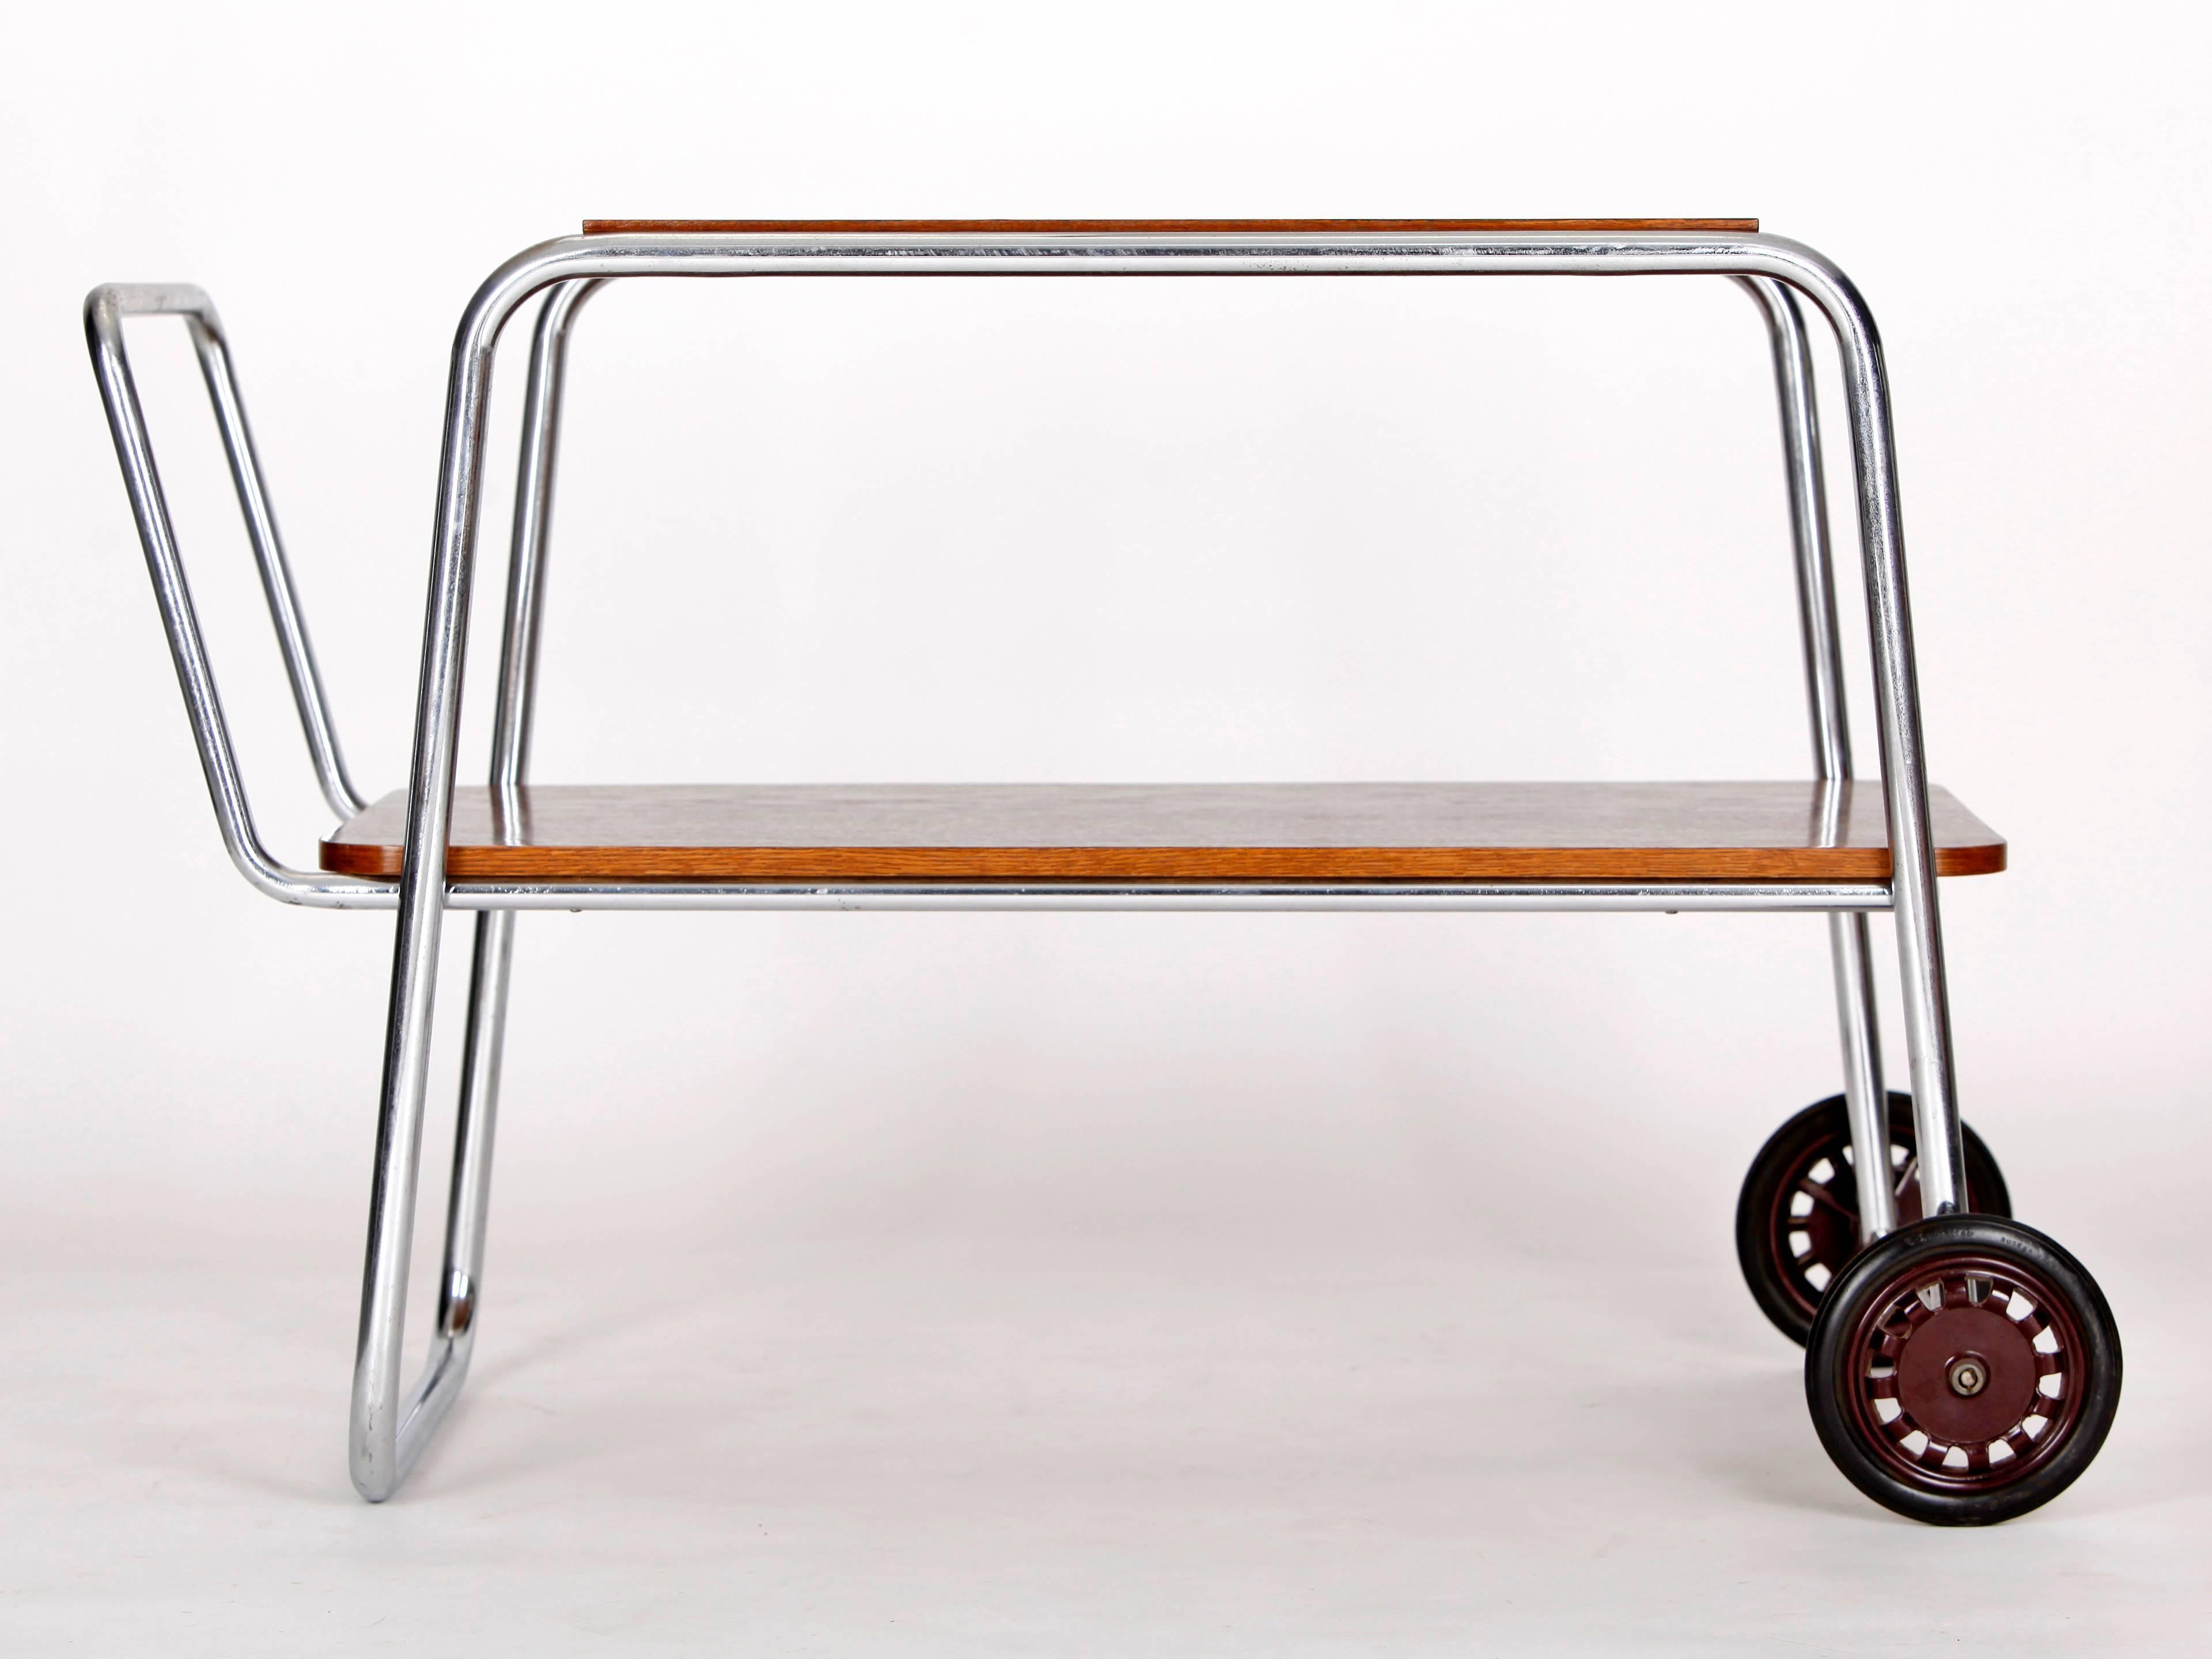 This bar or serving cart was designed and made by the Czech company Slezak and features original chrome plating with a little patina. The wooden panels have been restored.